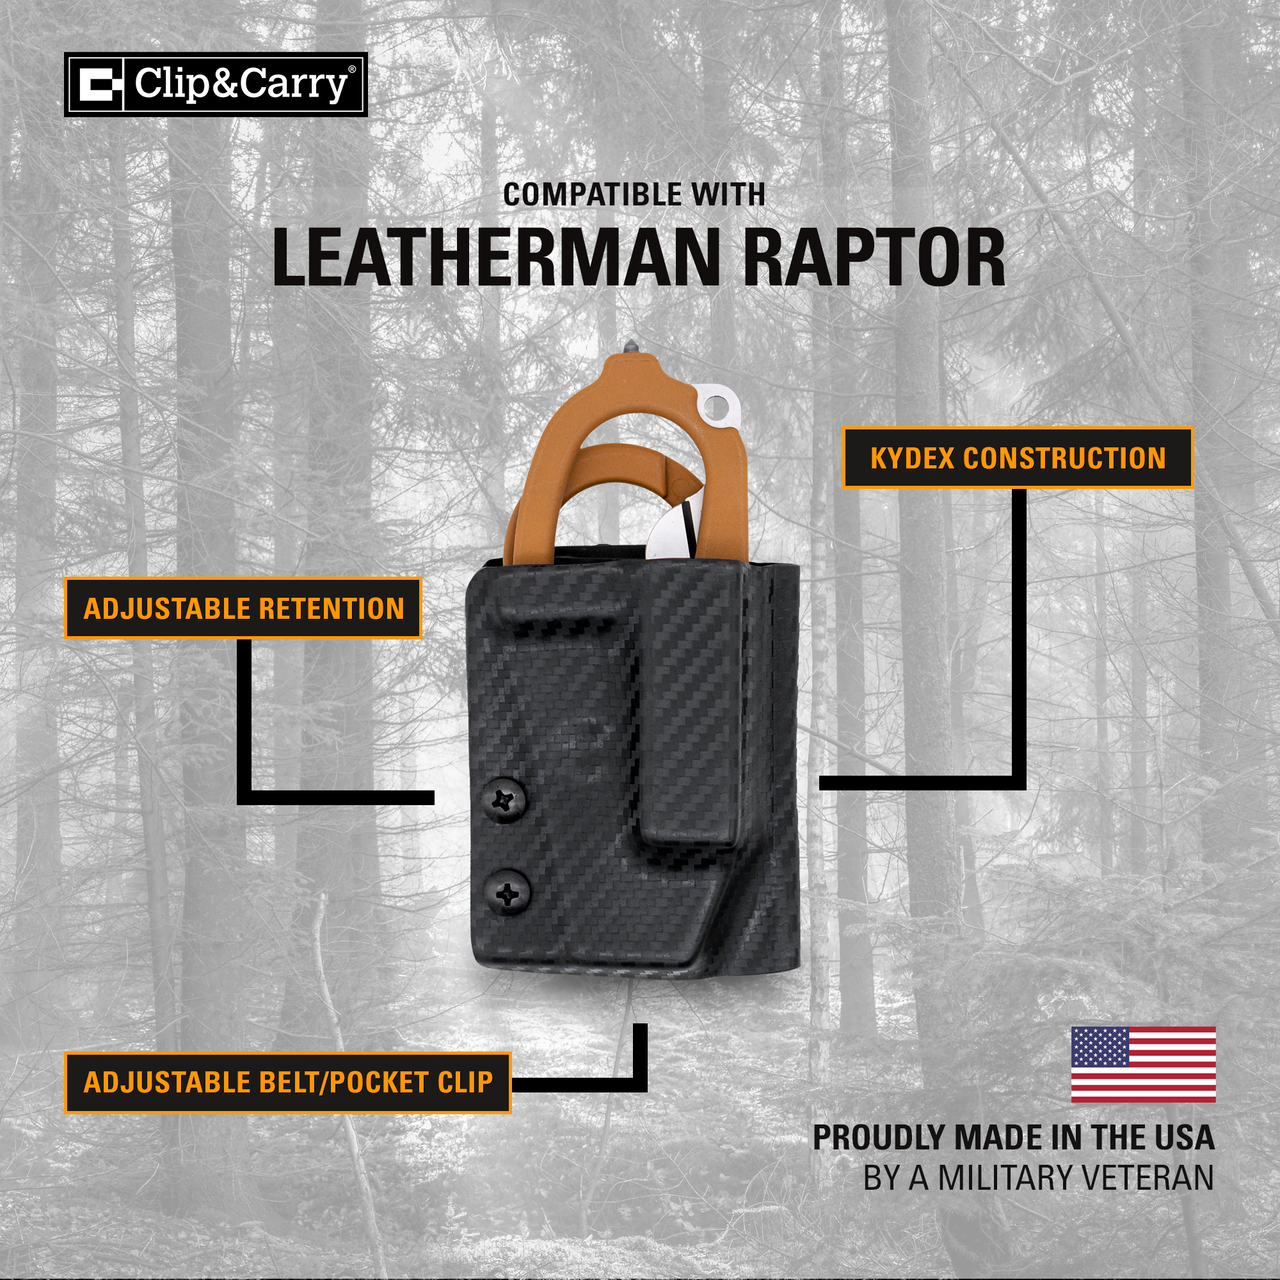 Kydex Sheath for the Leatherman Raptor Clip & Carry